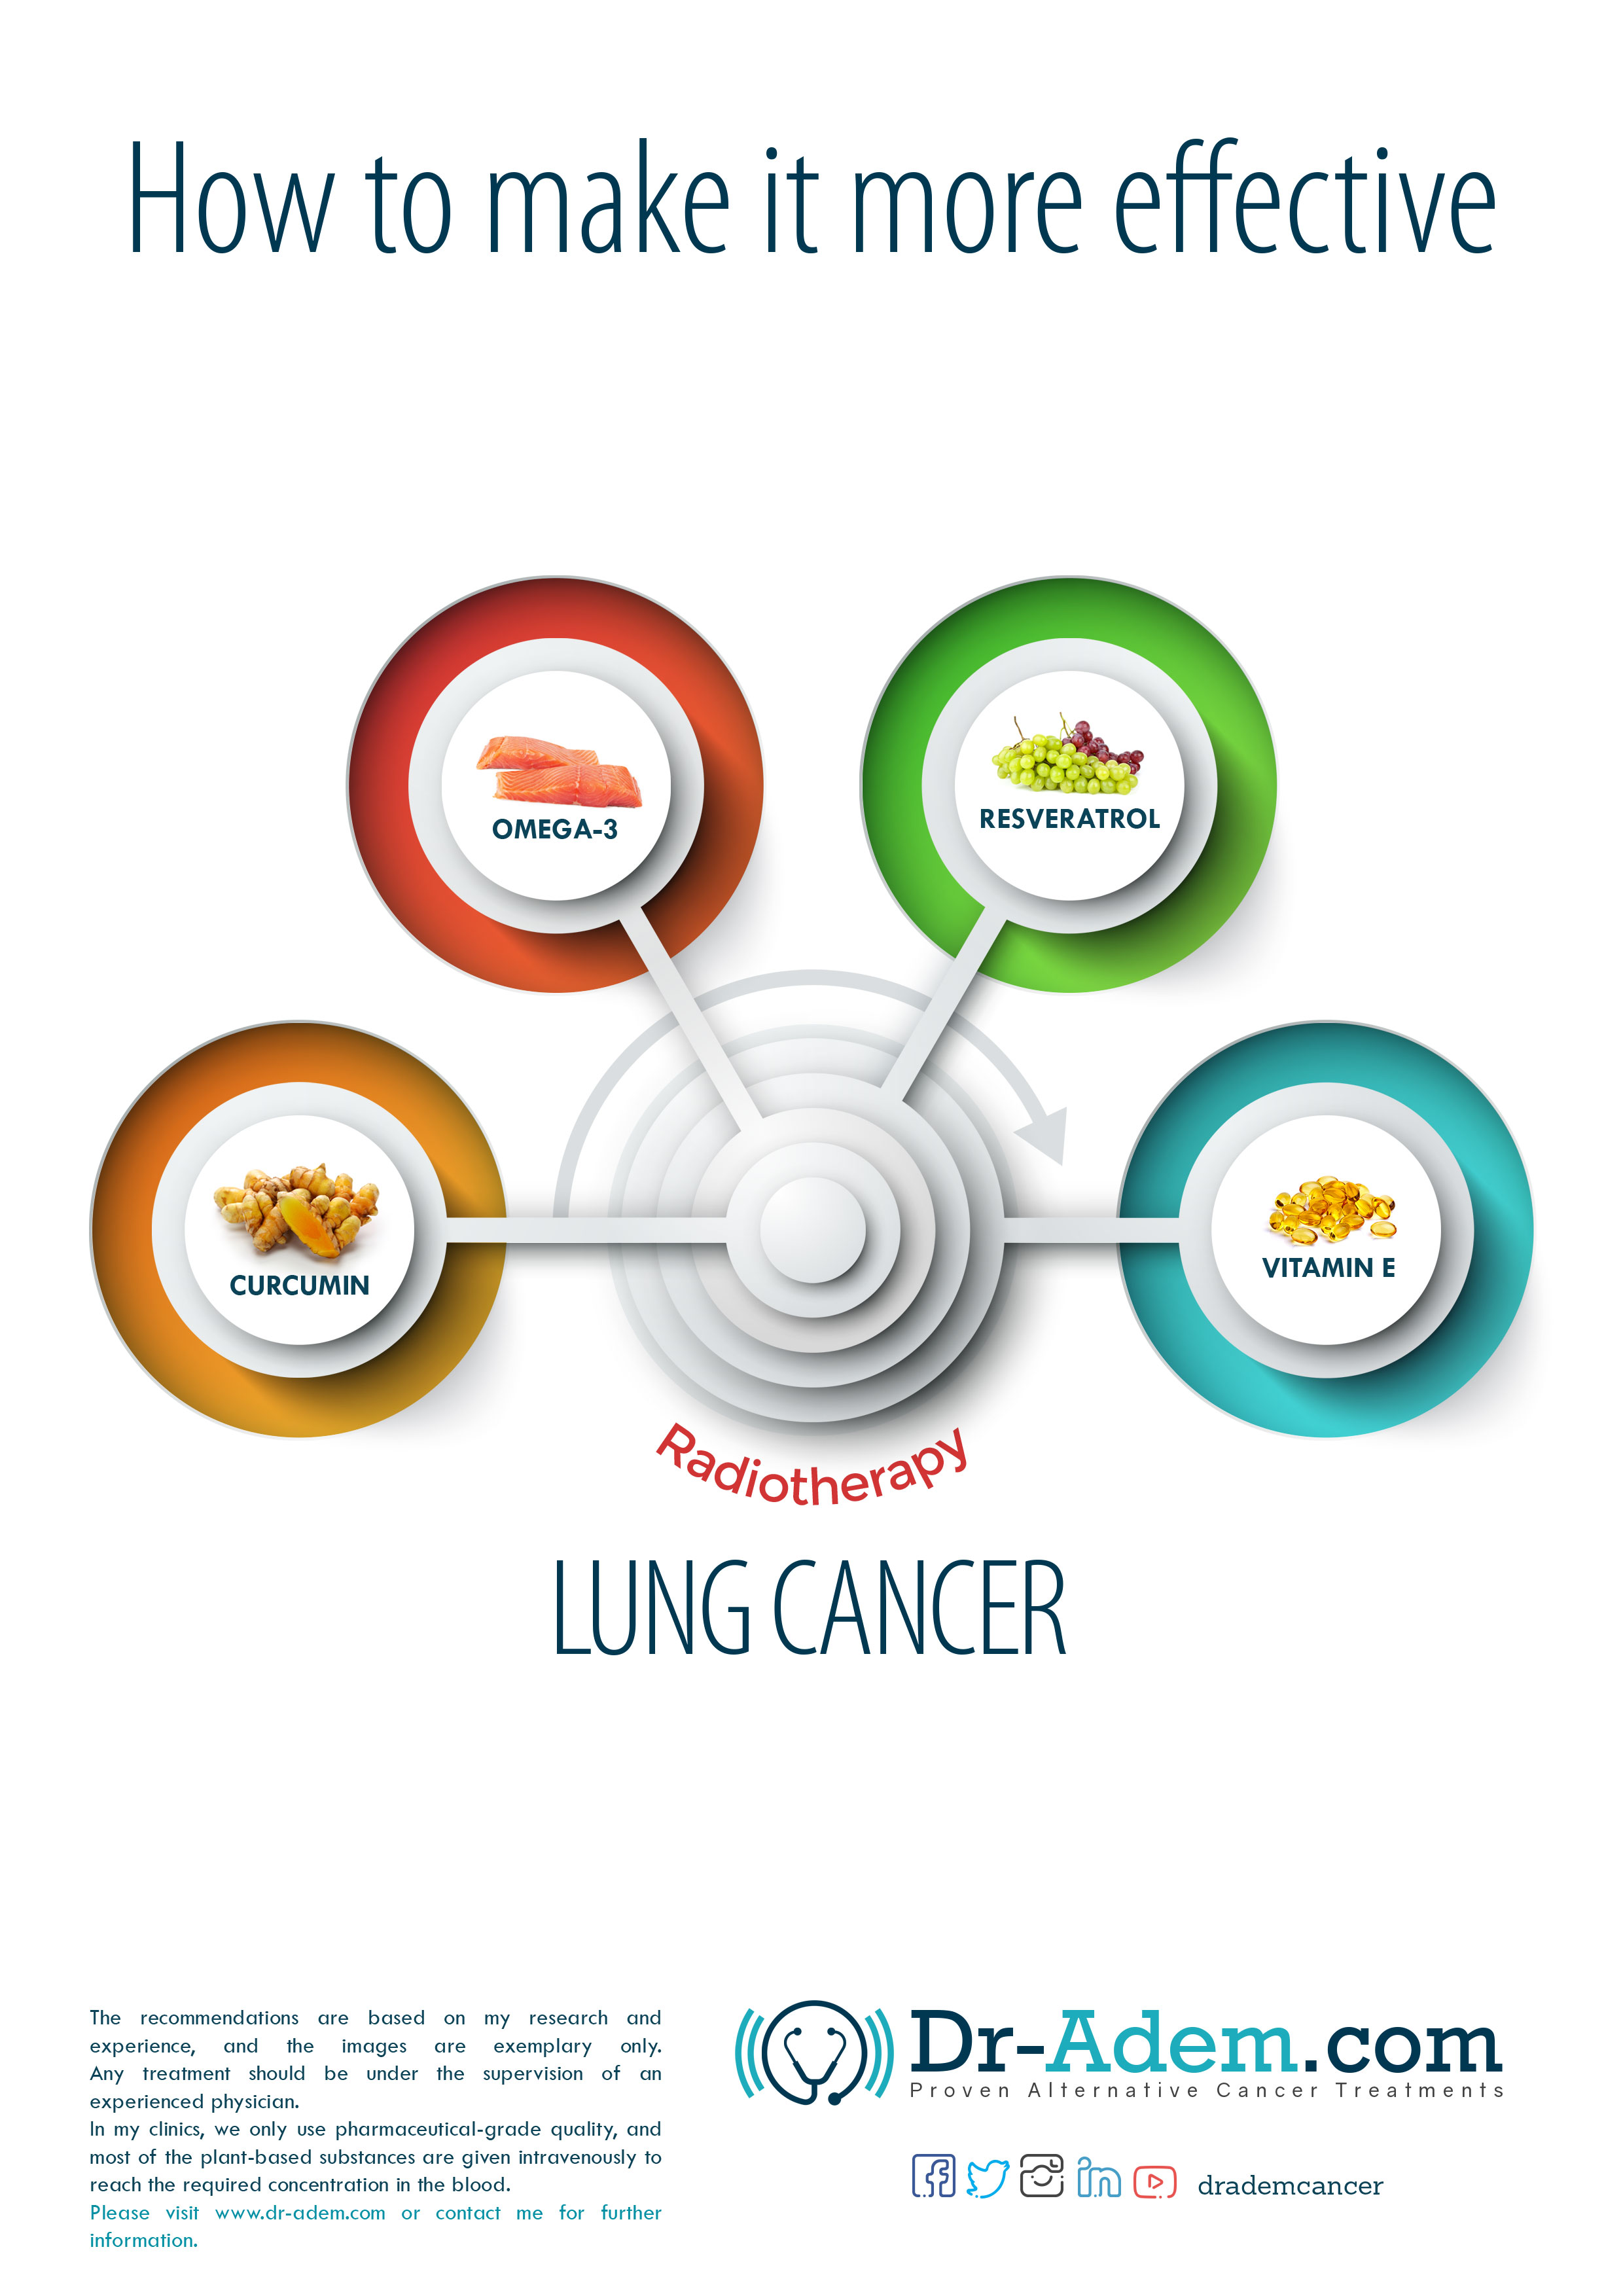 Radiotherapy For Lung Cancer